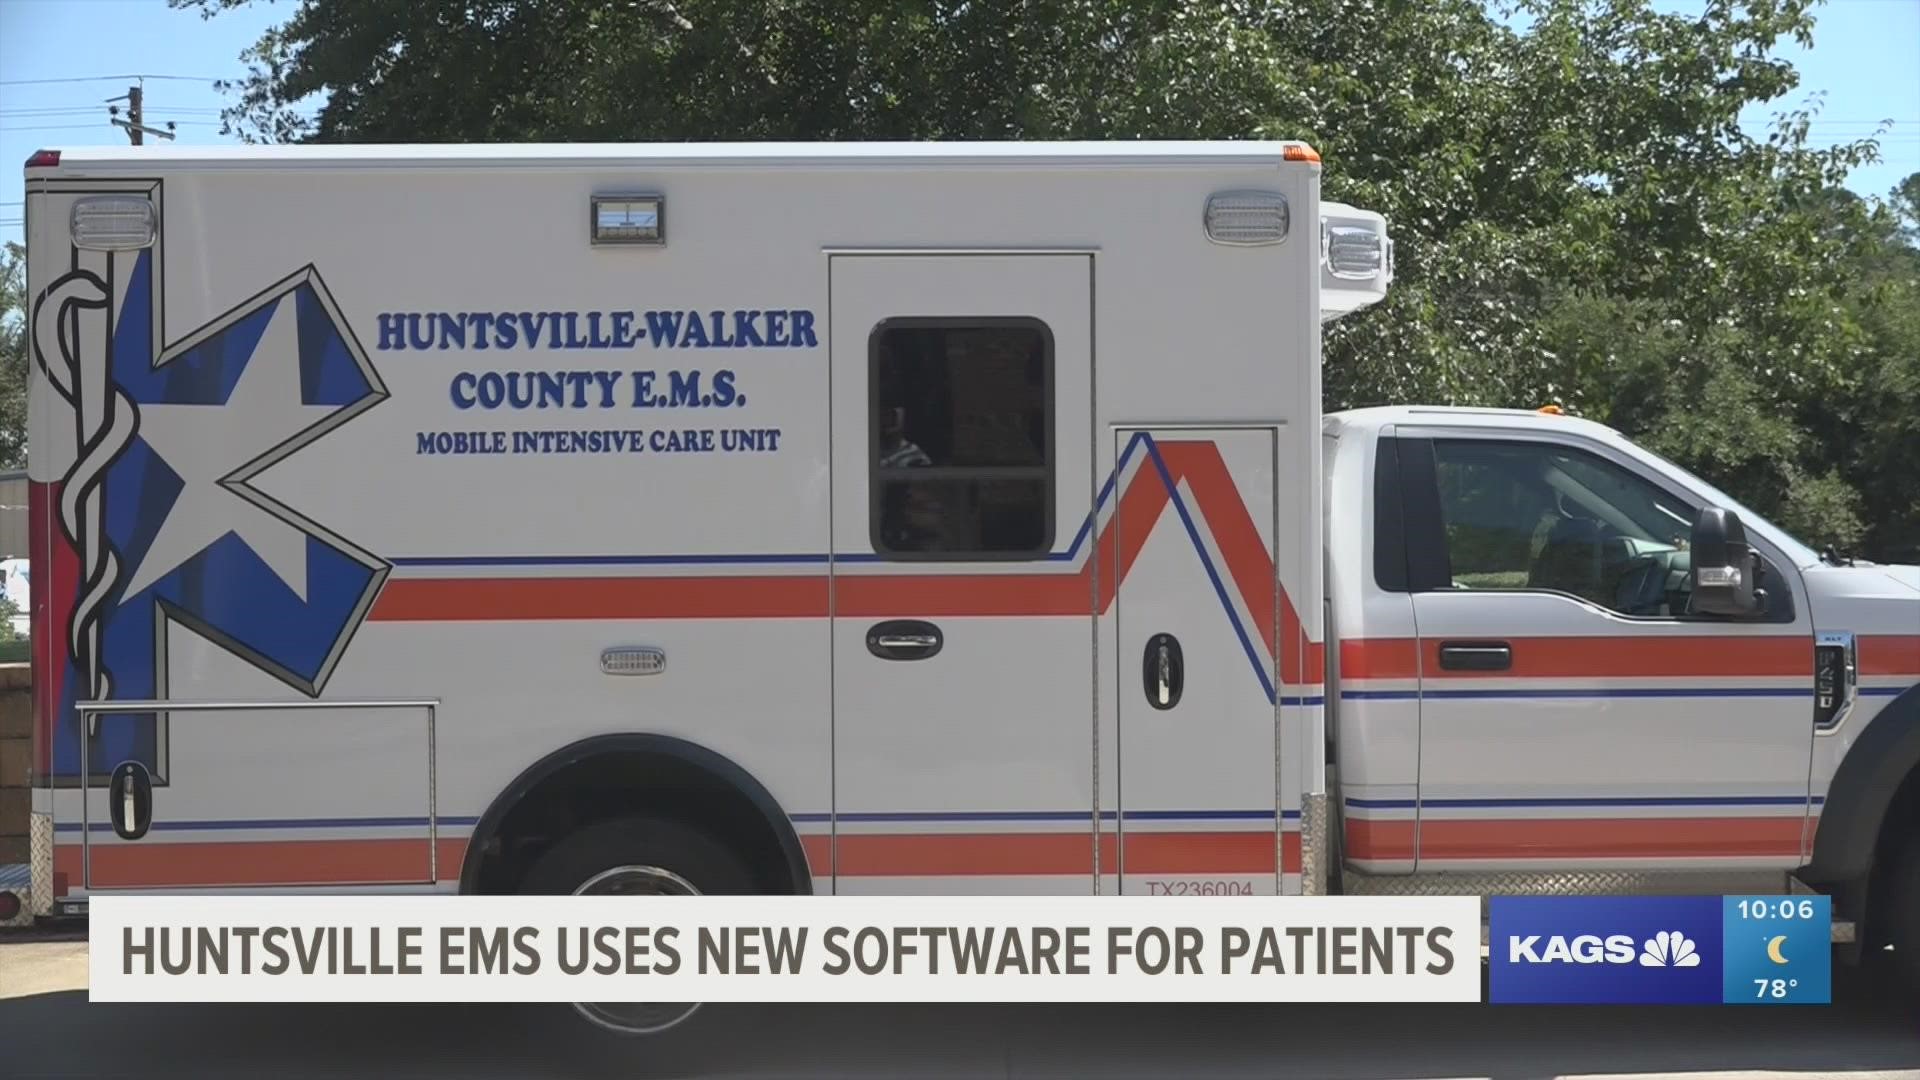 In Huntsville, first responders are using new technology to continue putting public safety above all and improve the outcomes for healthcare patients.